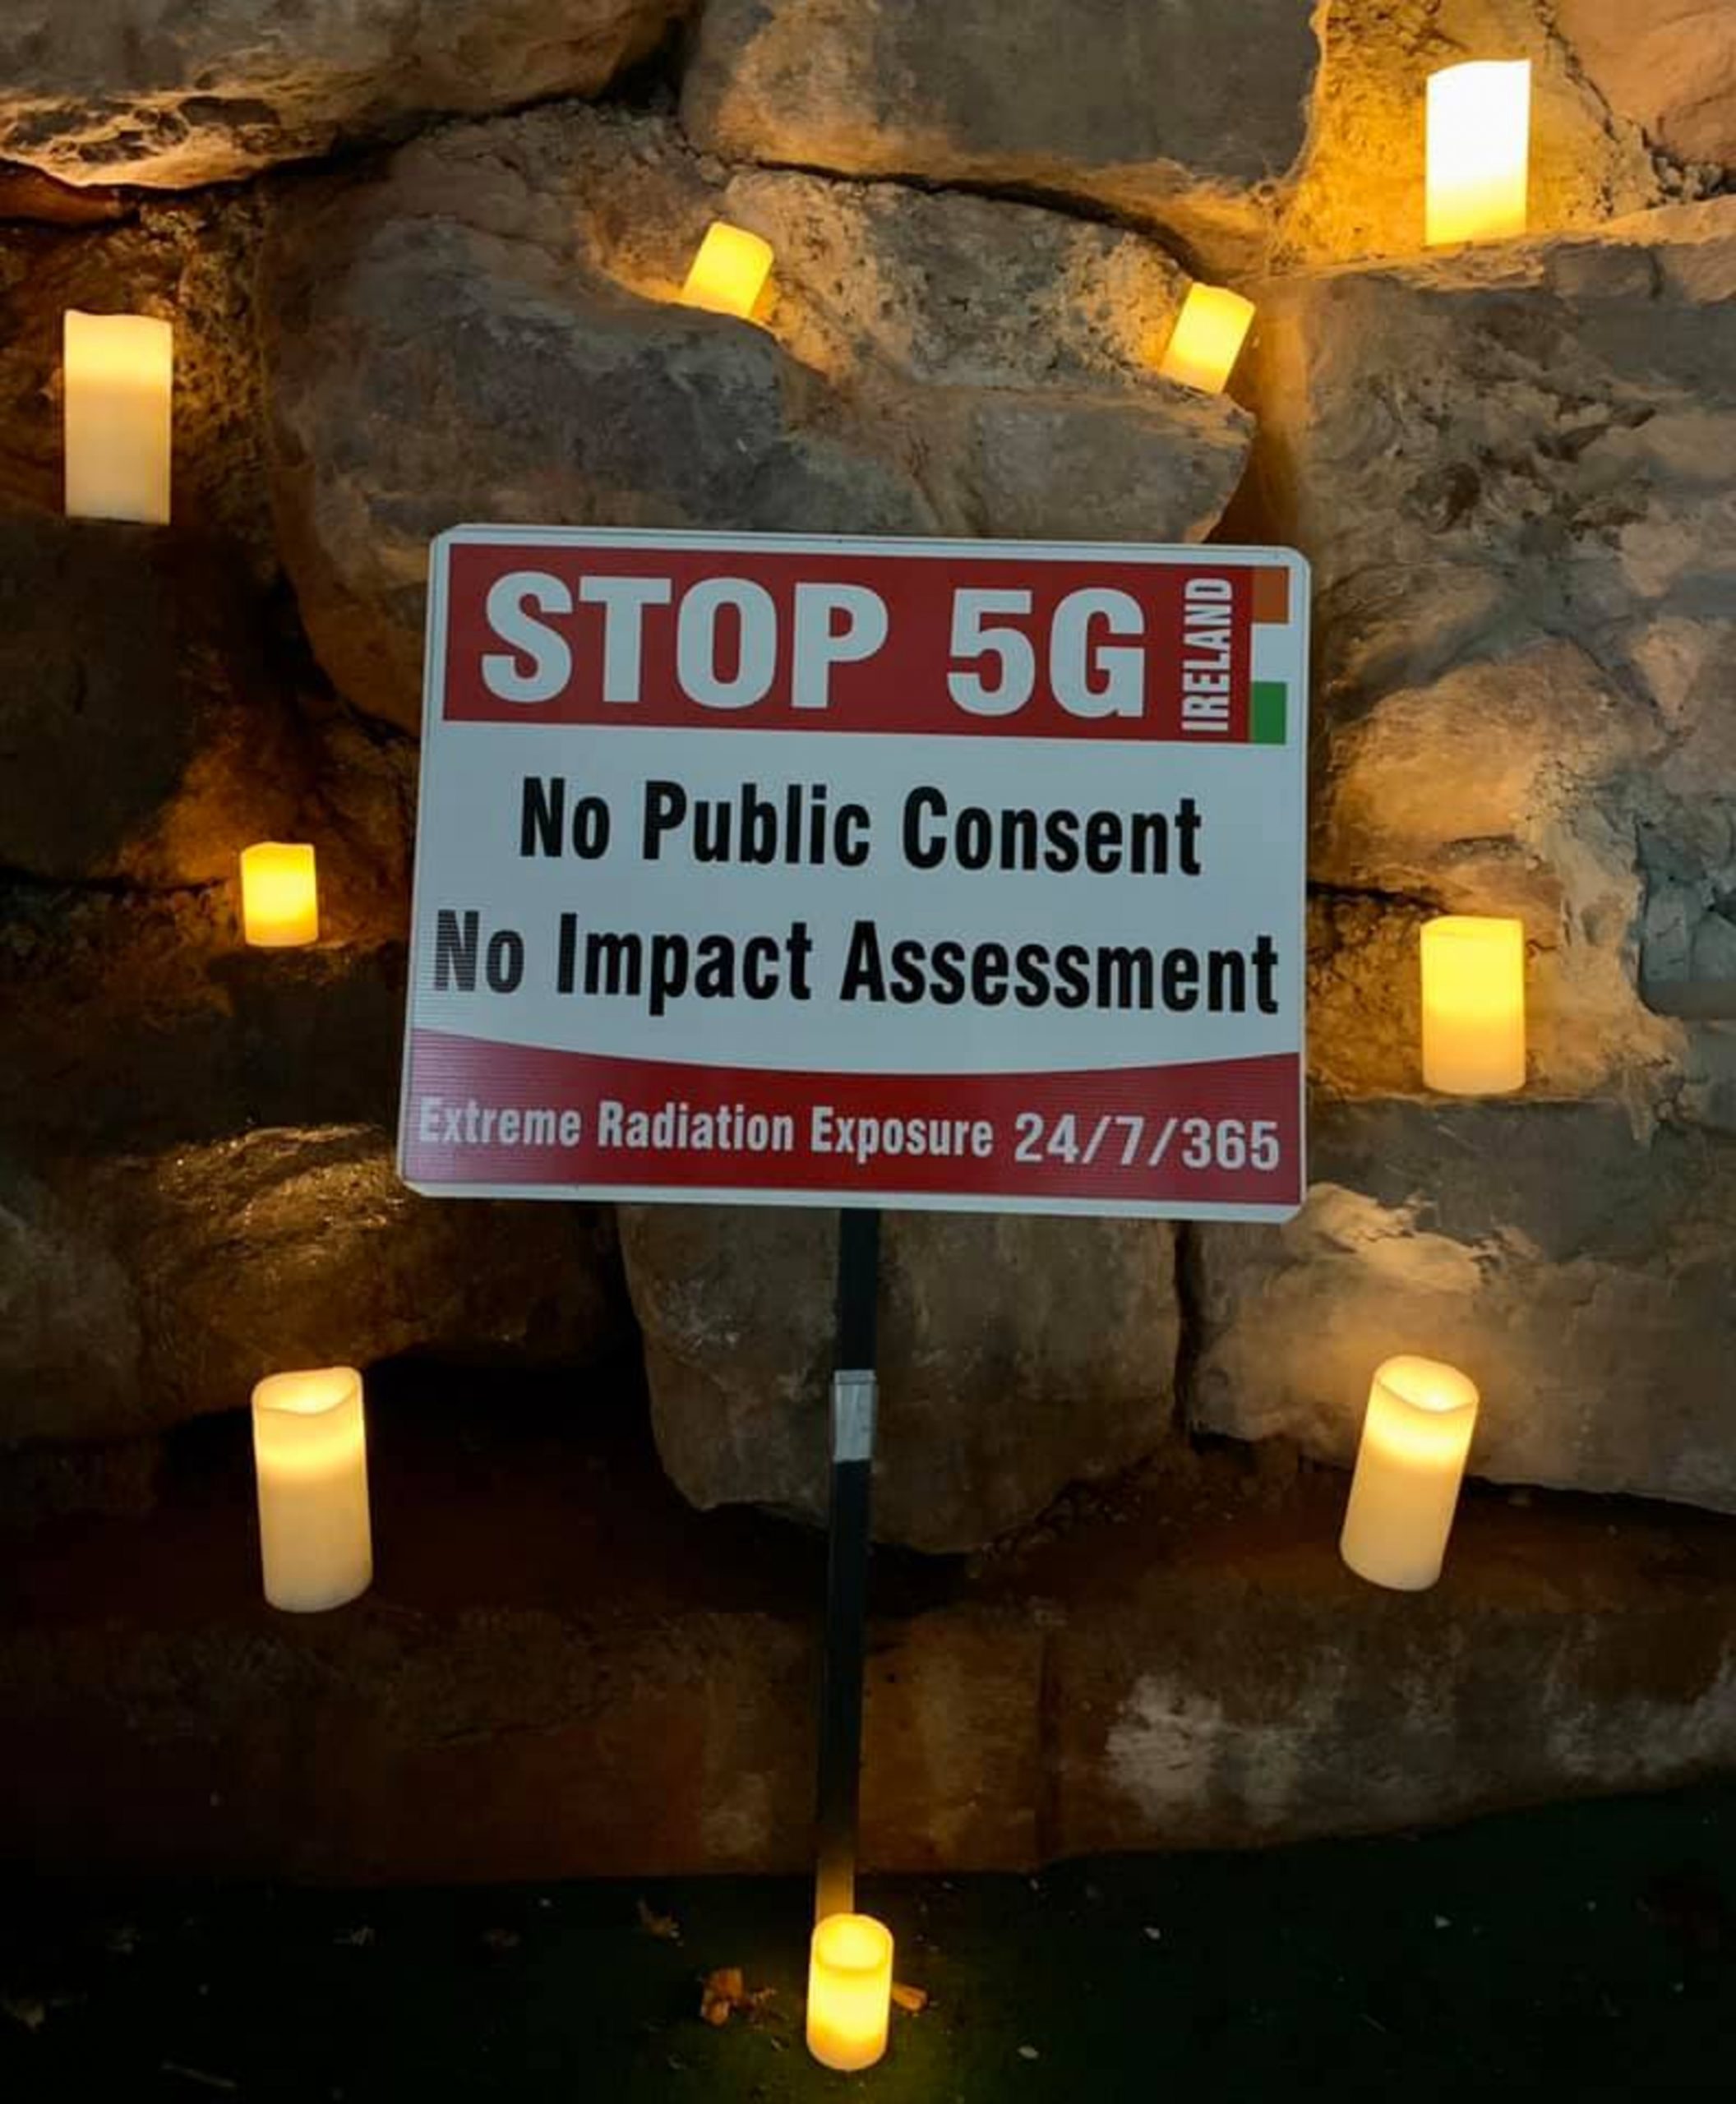 Digitalising Wilmslow: 5G Assault on Health and Environment without Informed Consent